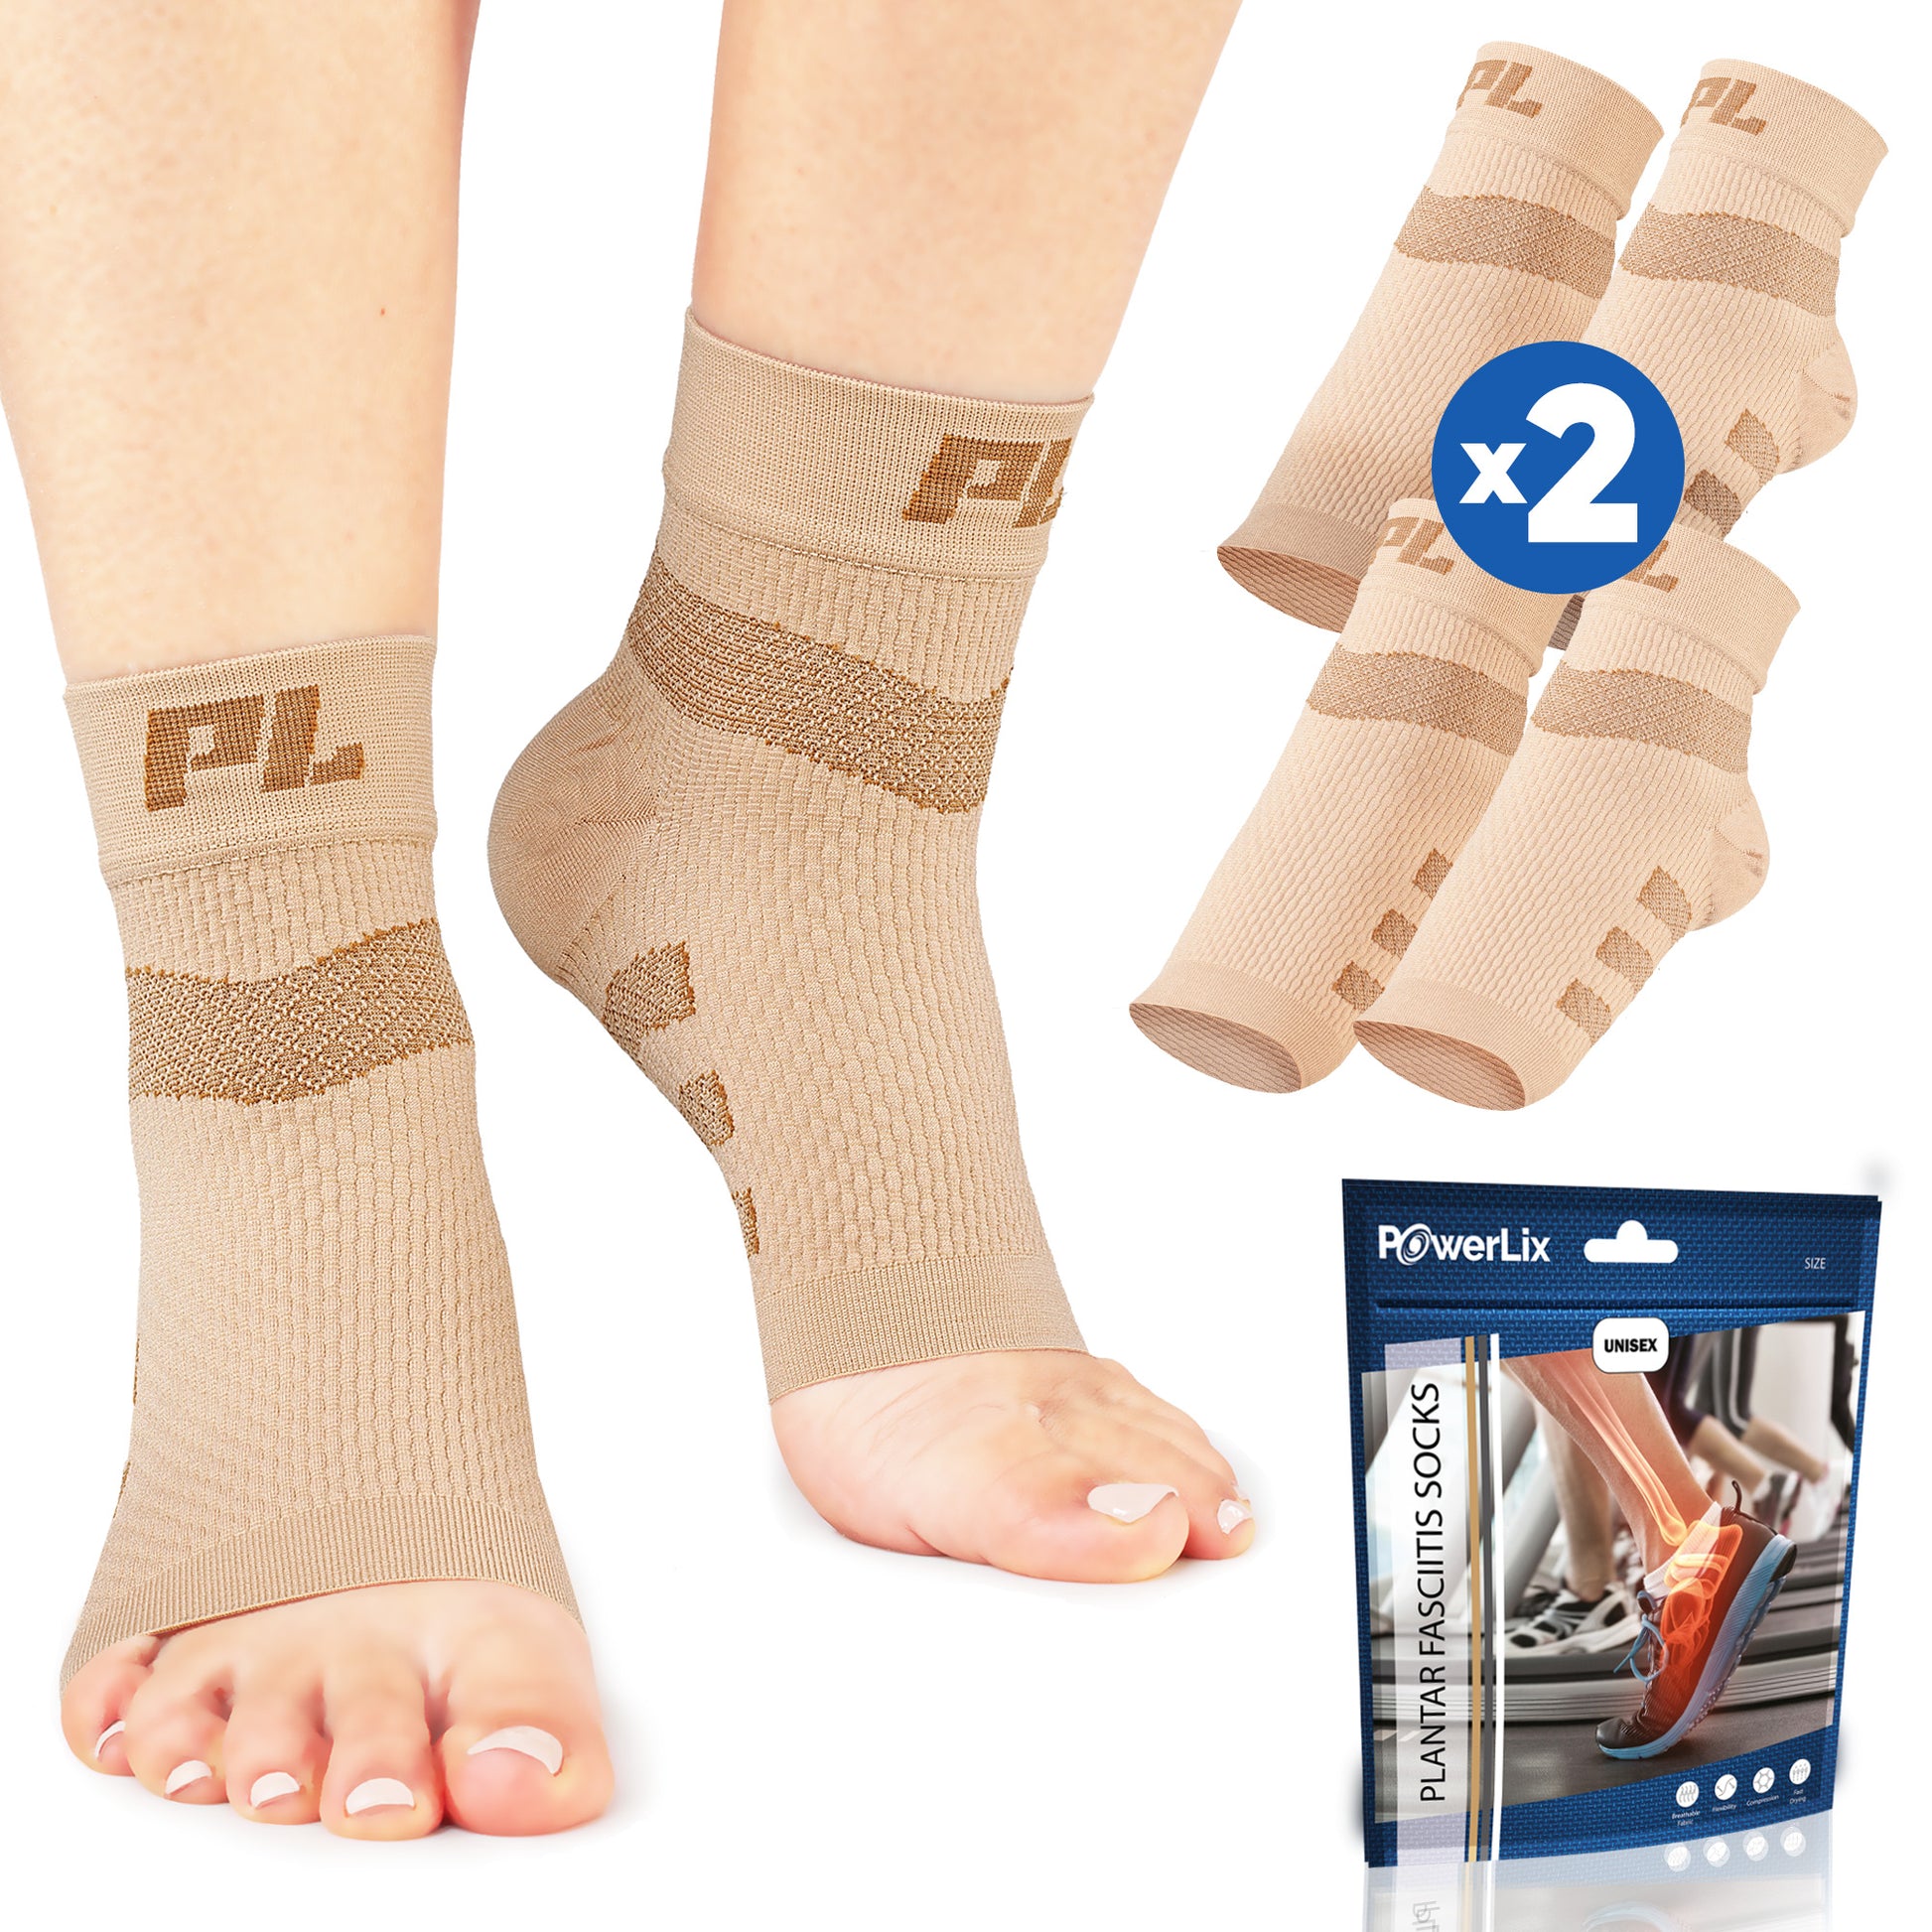 Powerlix plantar fasciitis support socks in beige on a model with the bag they come in behind the model. Two pairs of the socks are displayed in the background.